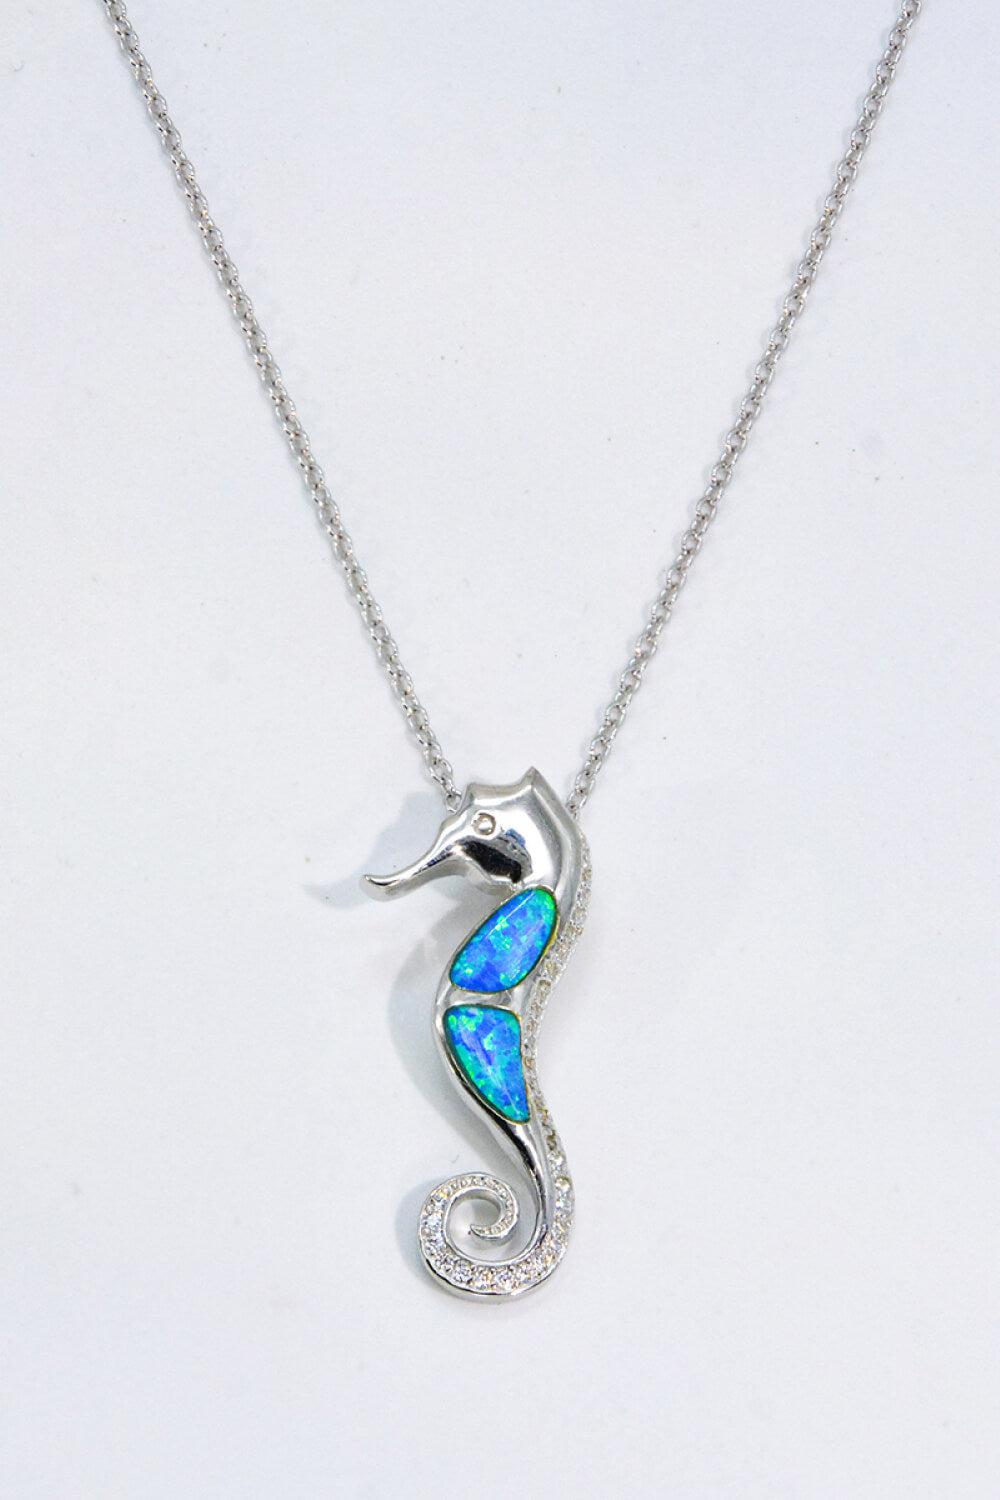 Opal Seahorse 925 Sterling Silver Necklace BLUE ZONE PLANET